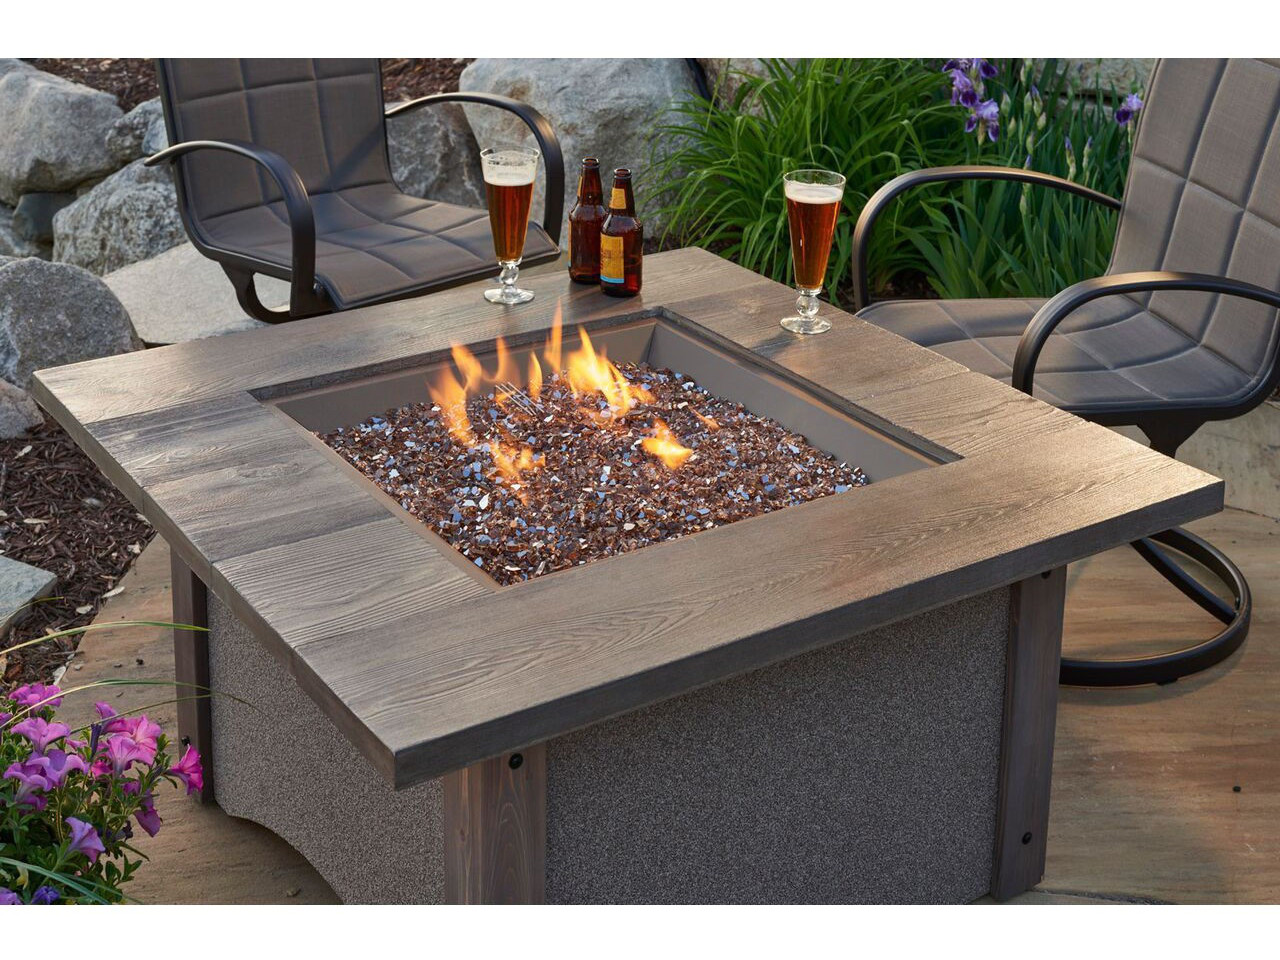 Patio Table With Firepit
 Outdoor GreatRoom Pine Ridge Square Fire Pit Table with